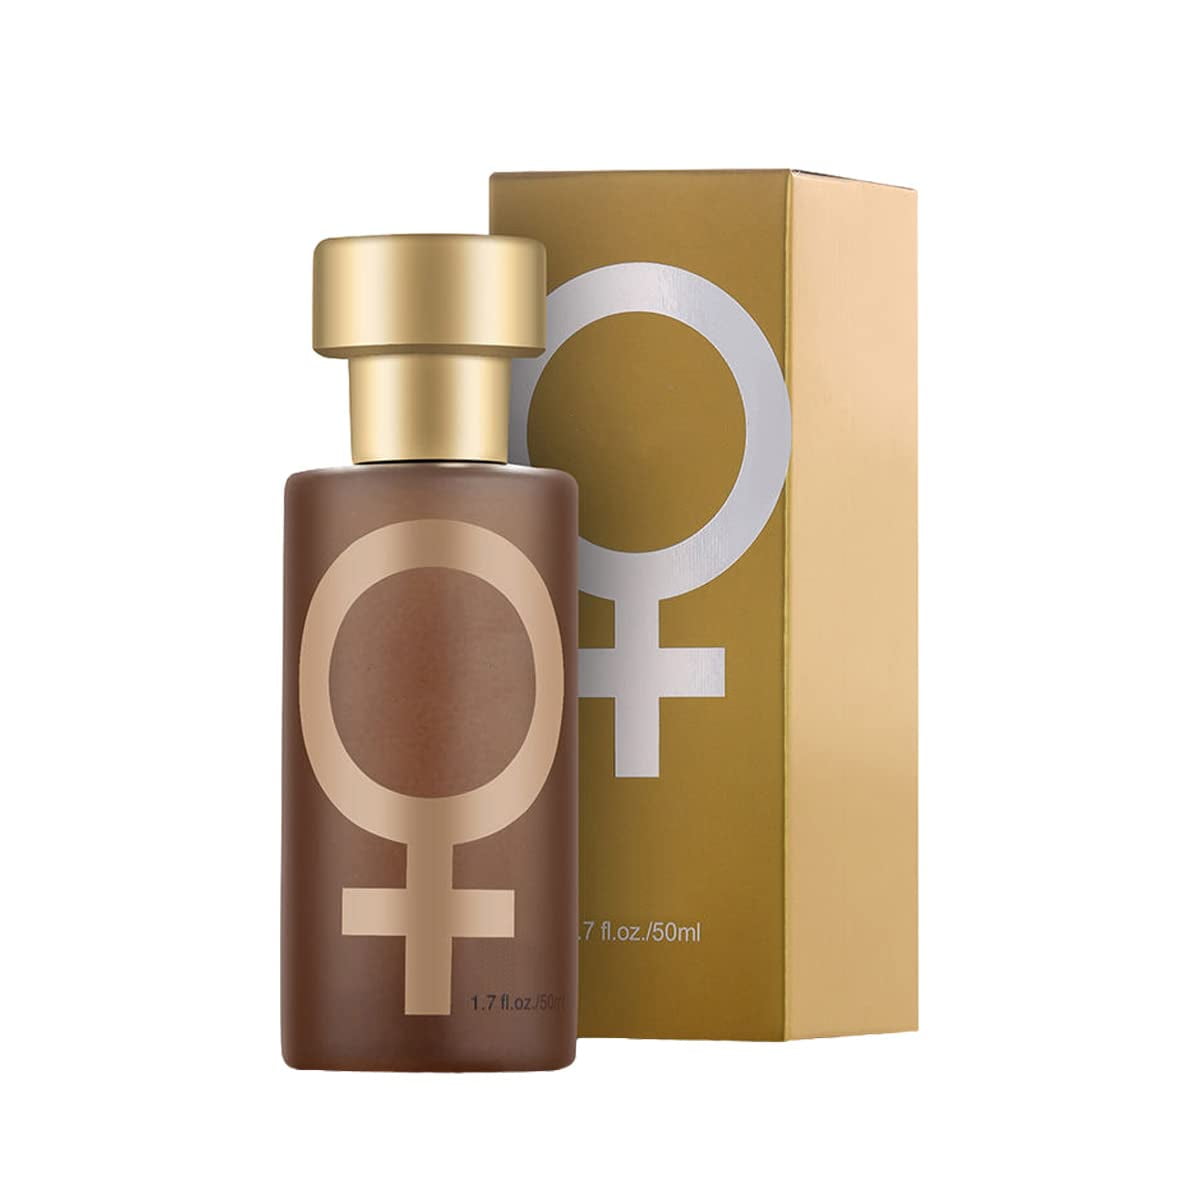 5 PCS Lure Her Perfume for Women - Lure Pheromone Perfume,Golden Pheromone  Cologne for Men Attract Women (for He),If you don't get 5, you will receive  a full refund 